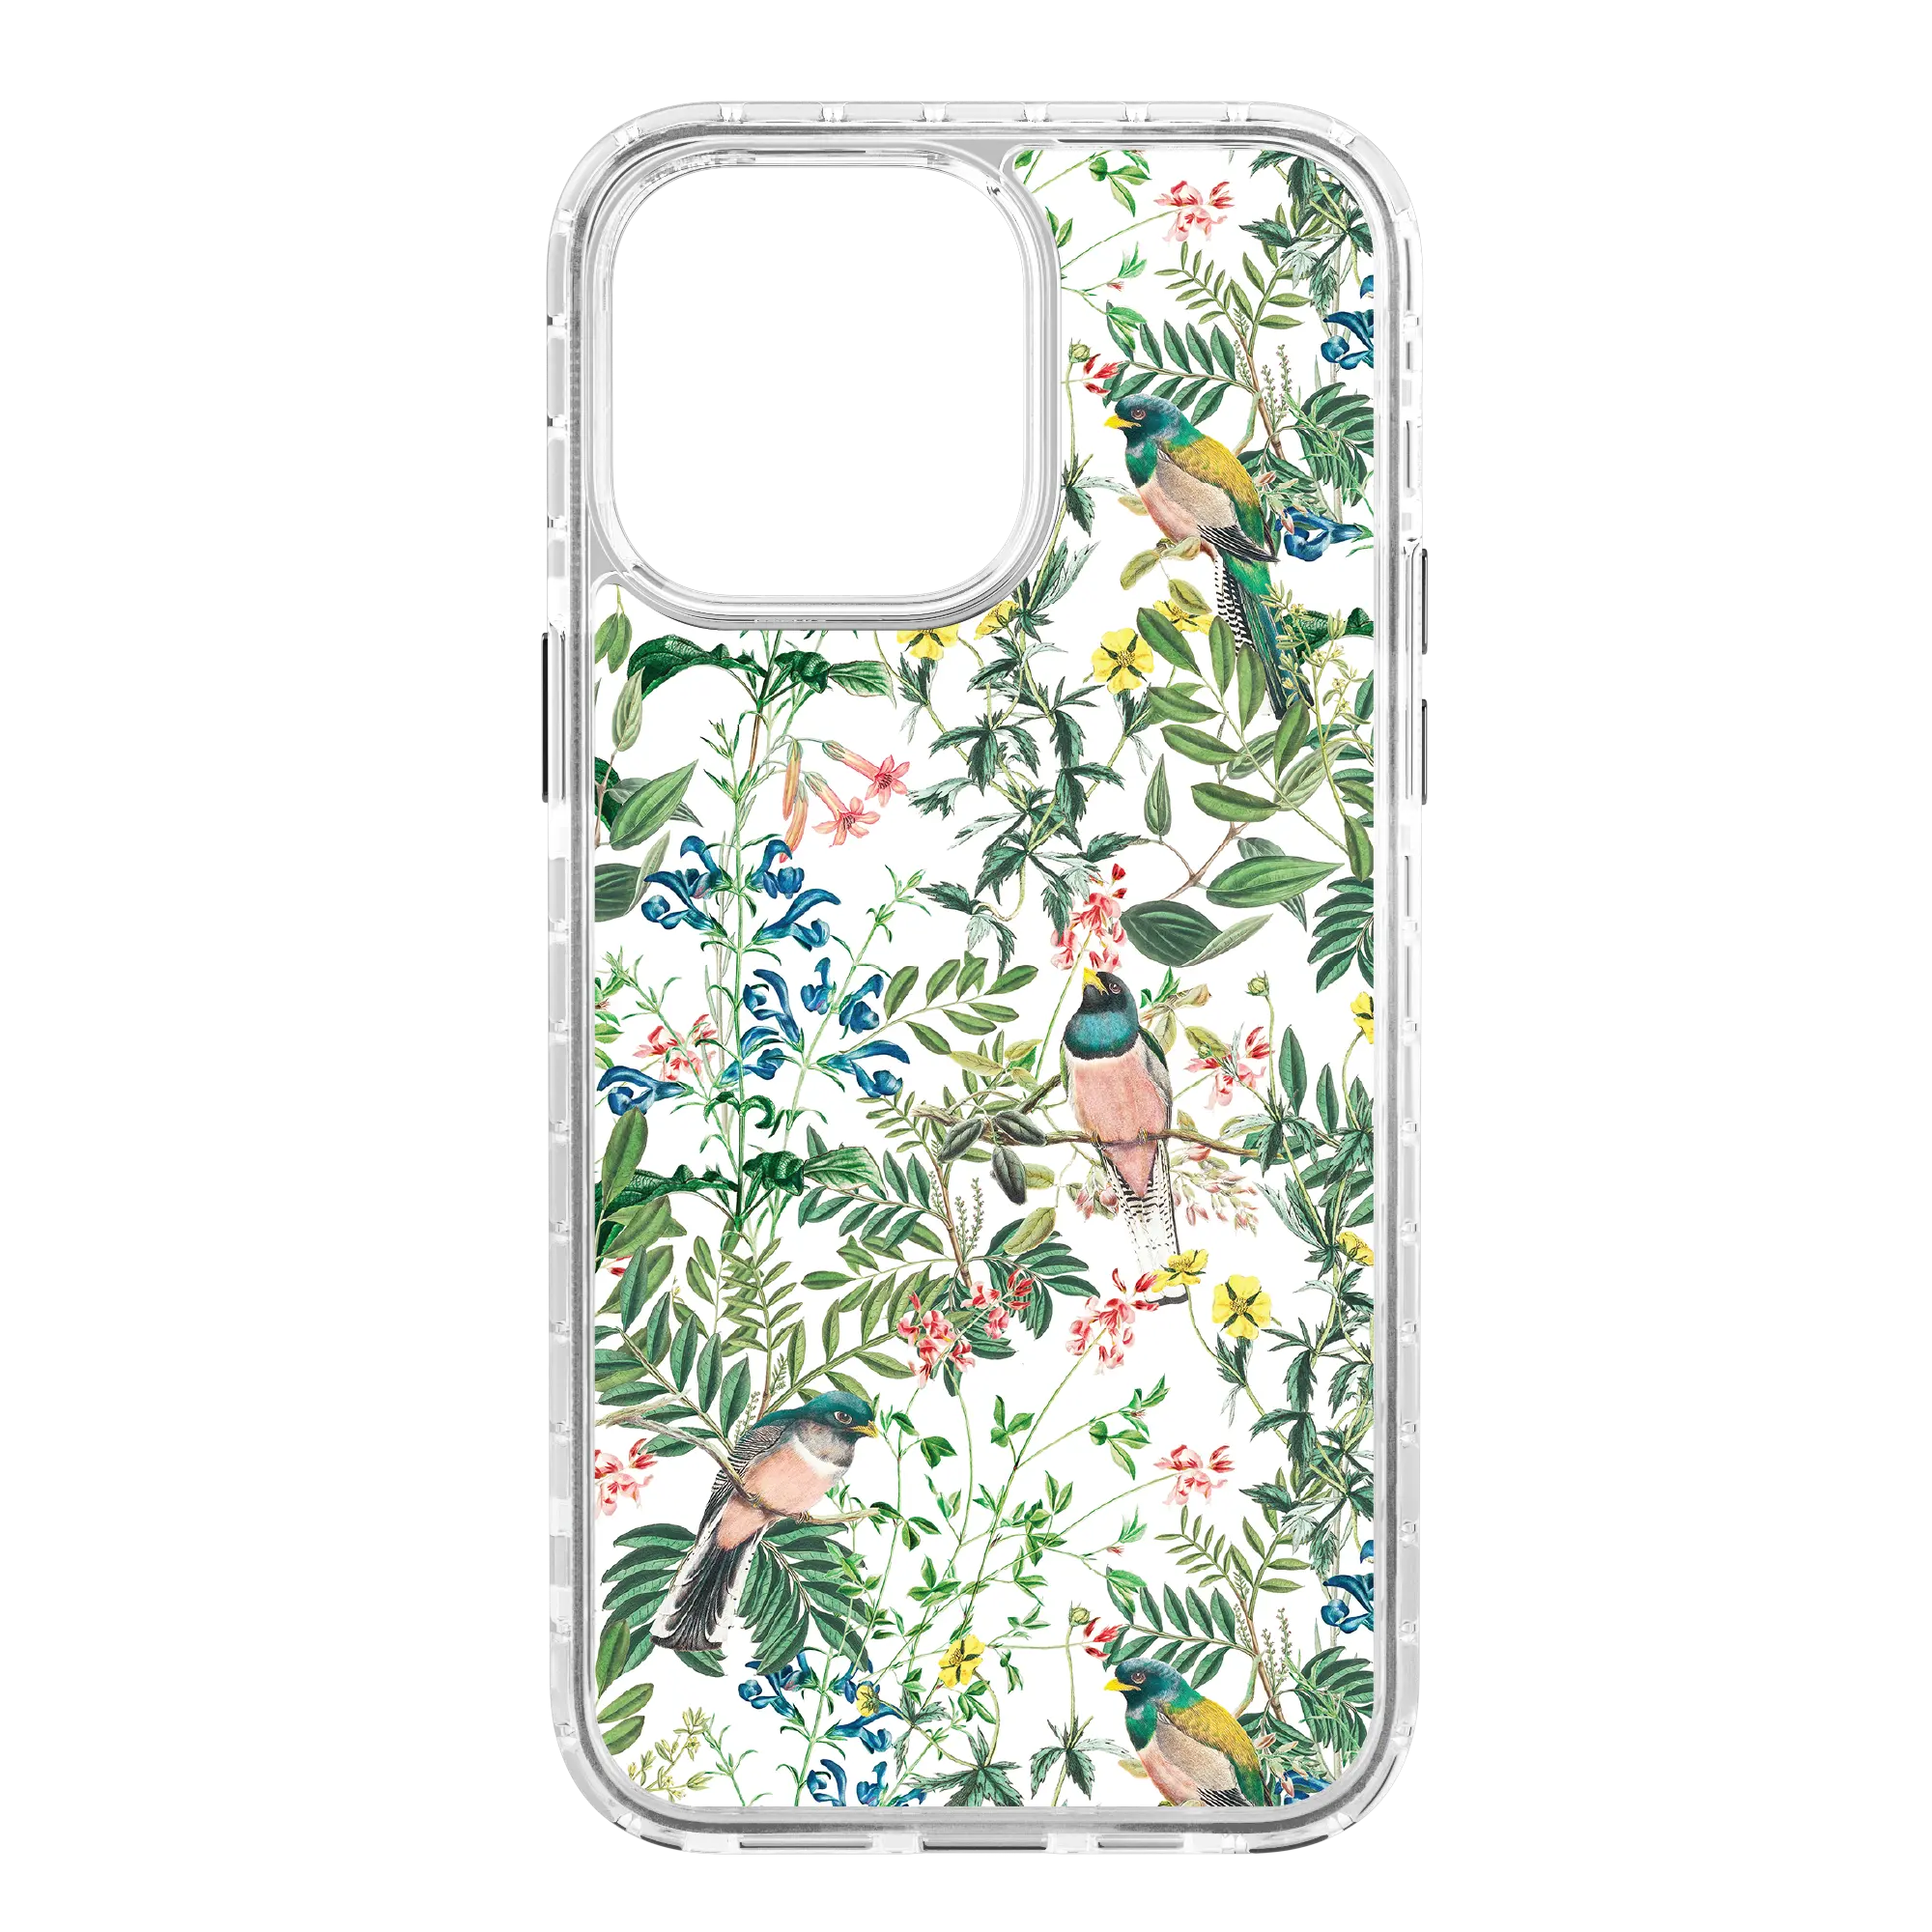 Apple-iPhone-14-Pro-Max-Crystal-Clear Oasis Blossom | Protective MagSafe Floral Bird Case | Birds and Bees Series for Apple iPhone 14 Series cellhelmet cellhelmet